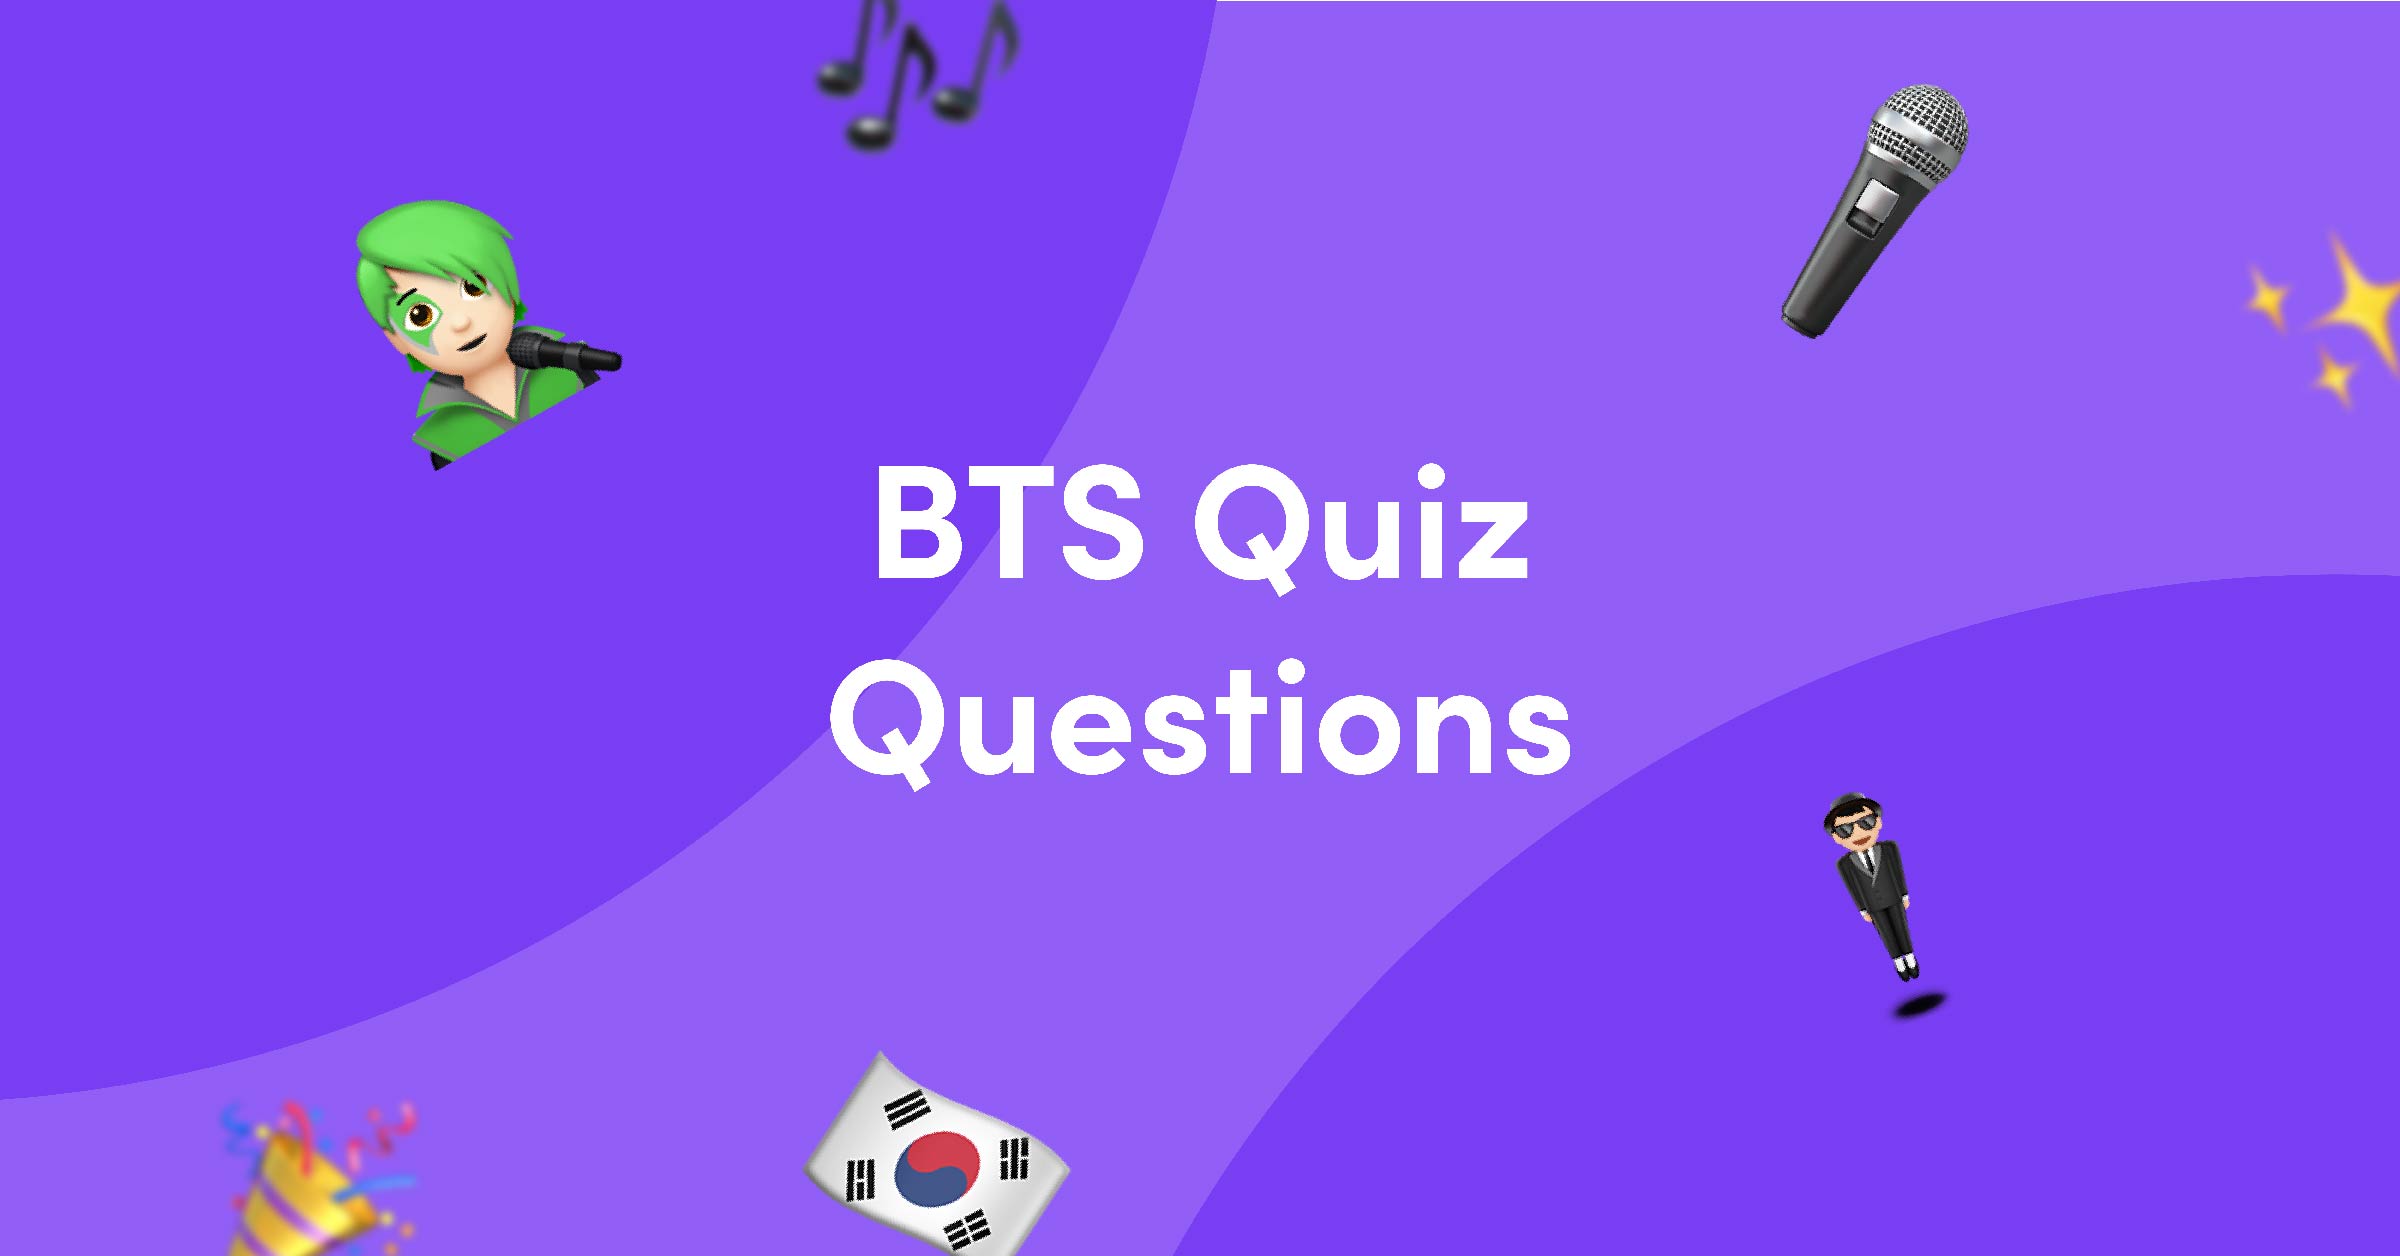 Purple background with emojis for BTS quiz quiz questions and answers